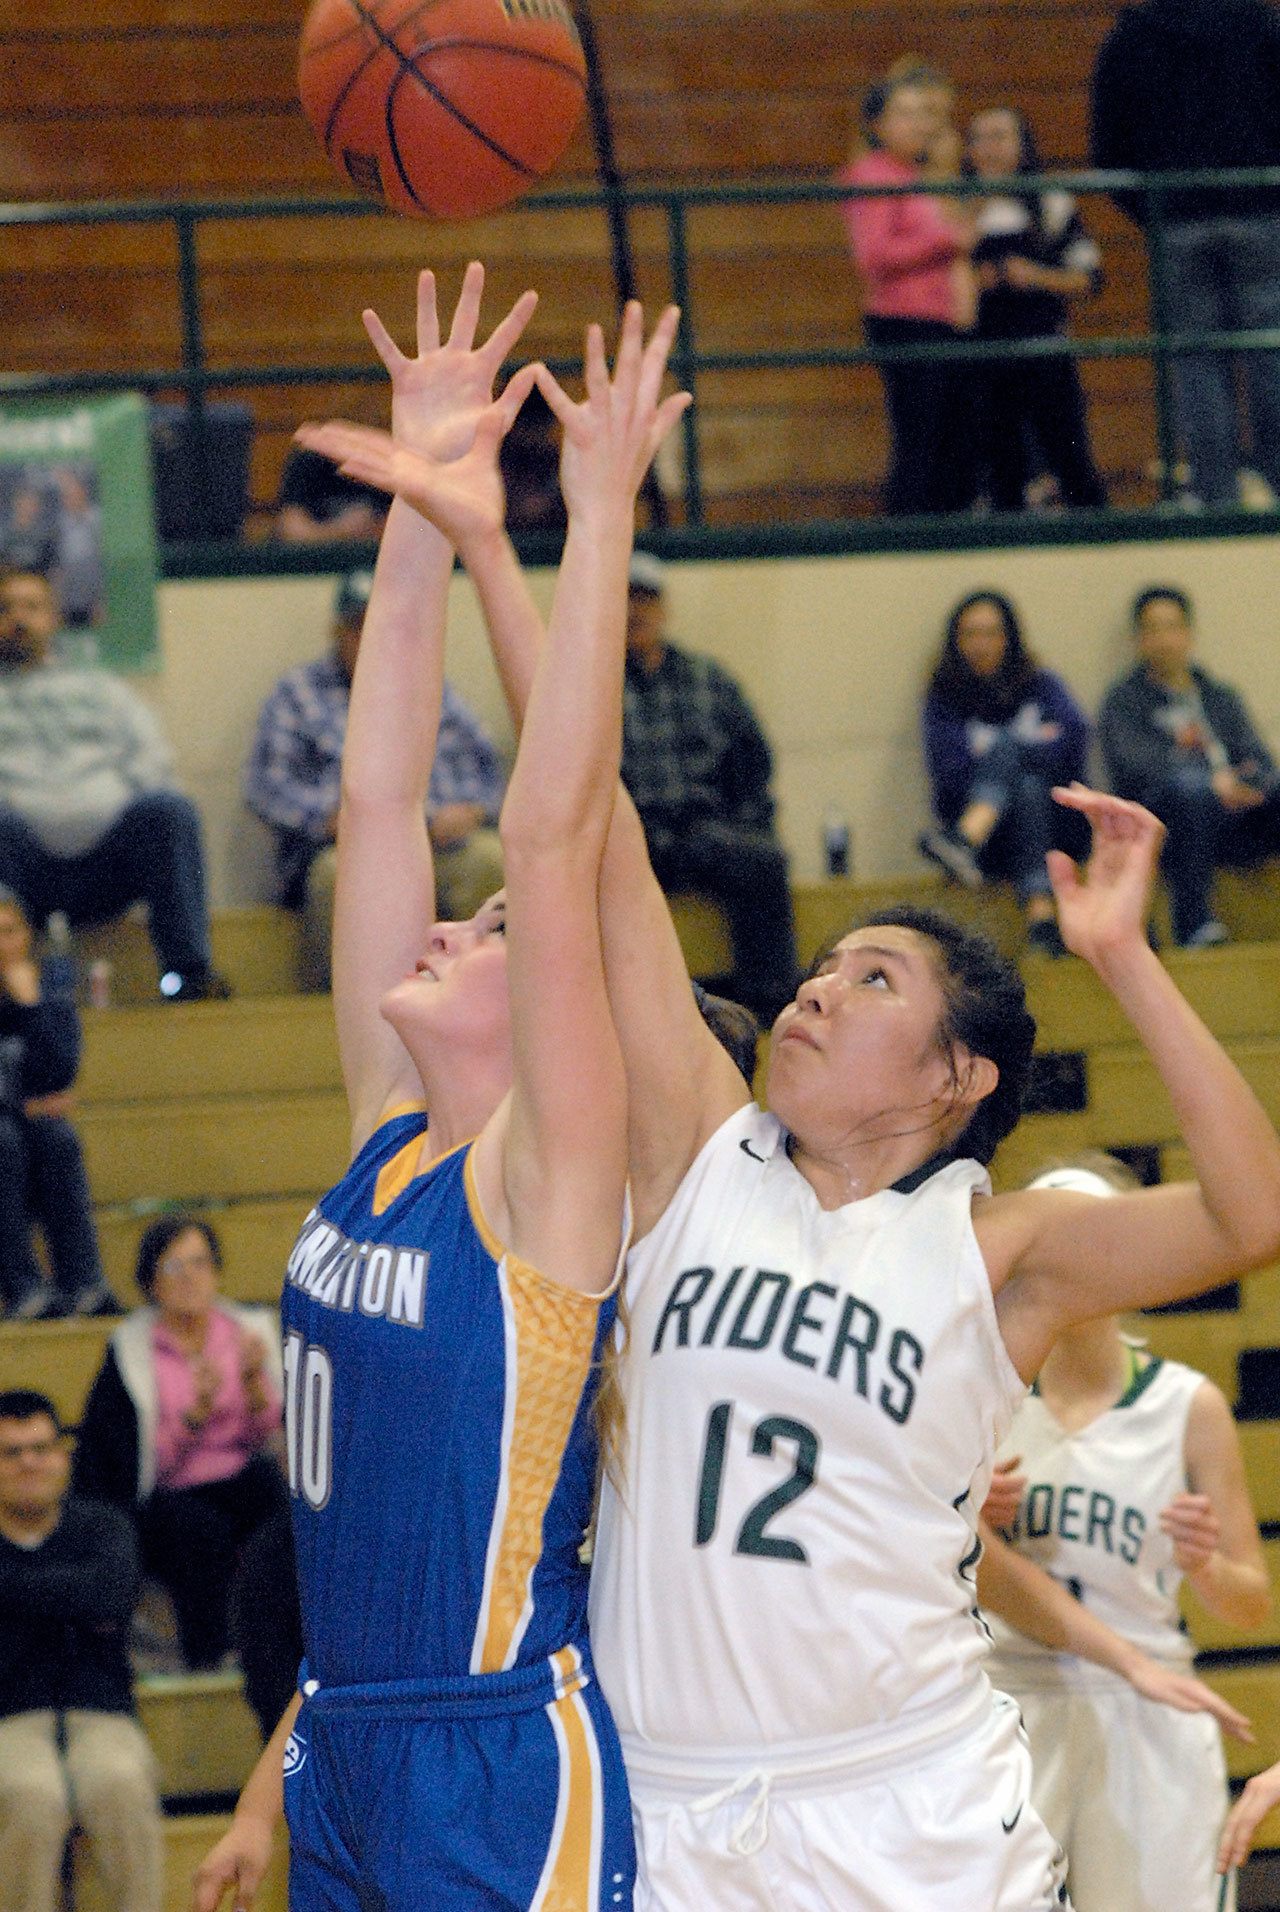 Keith Thorpe/Peninsula Daily News Bremerton’s Sophia Smith, left, and Port Angeles’ Cheyenne Wheeler fight for a rebound in the second quarter on Friday night at Port Angeles High School.